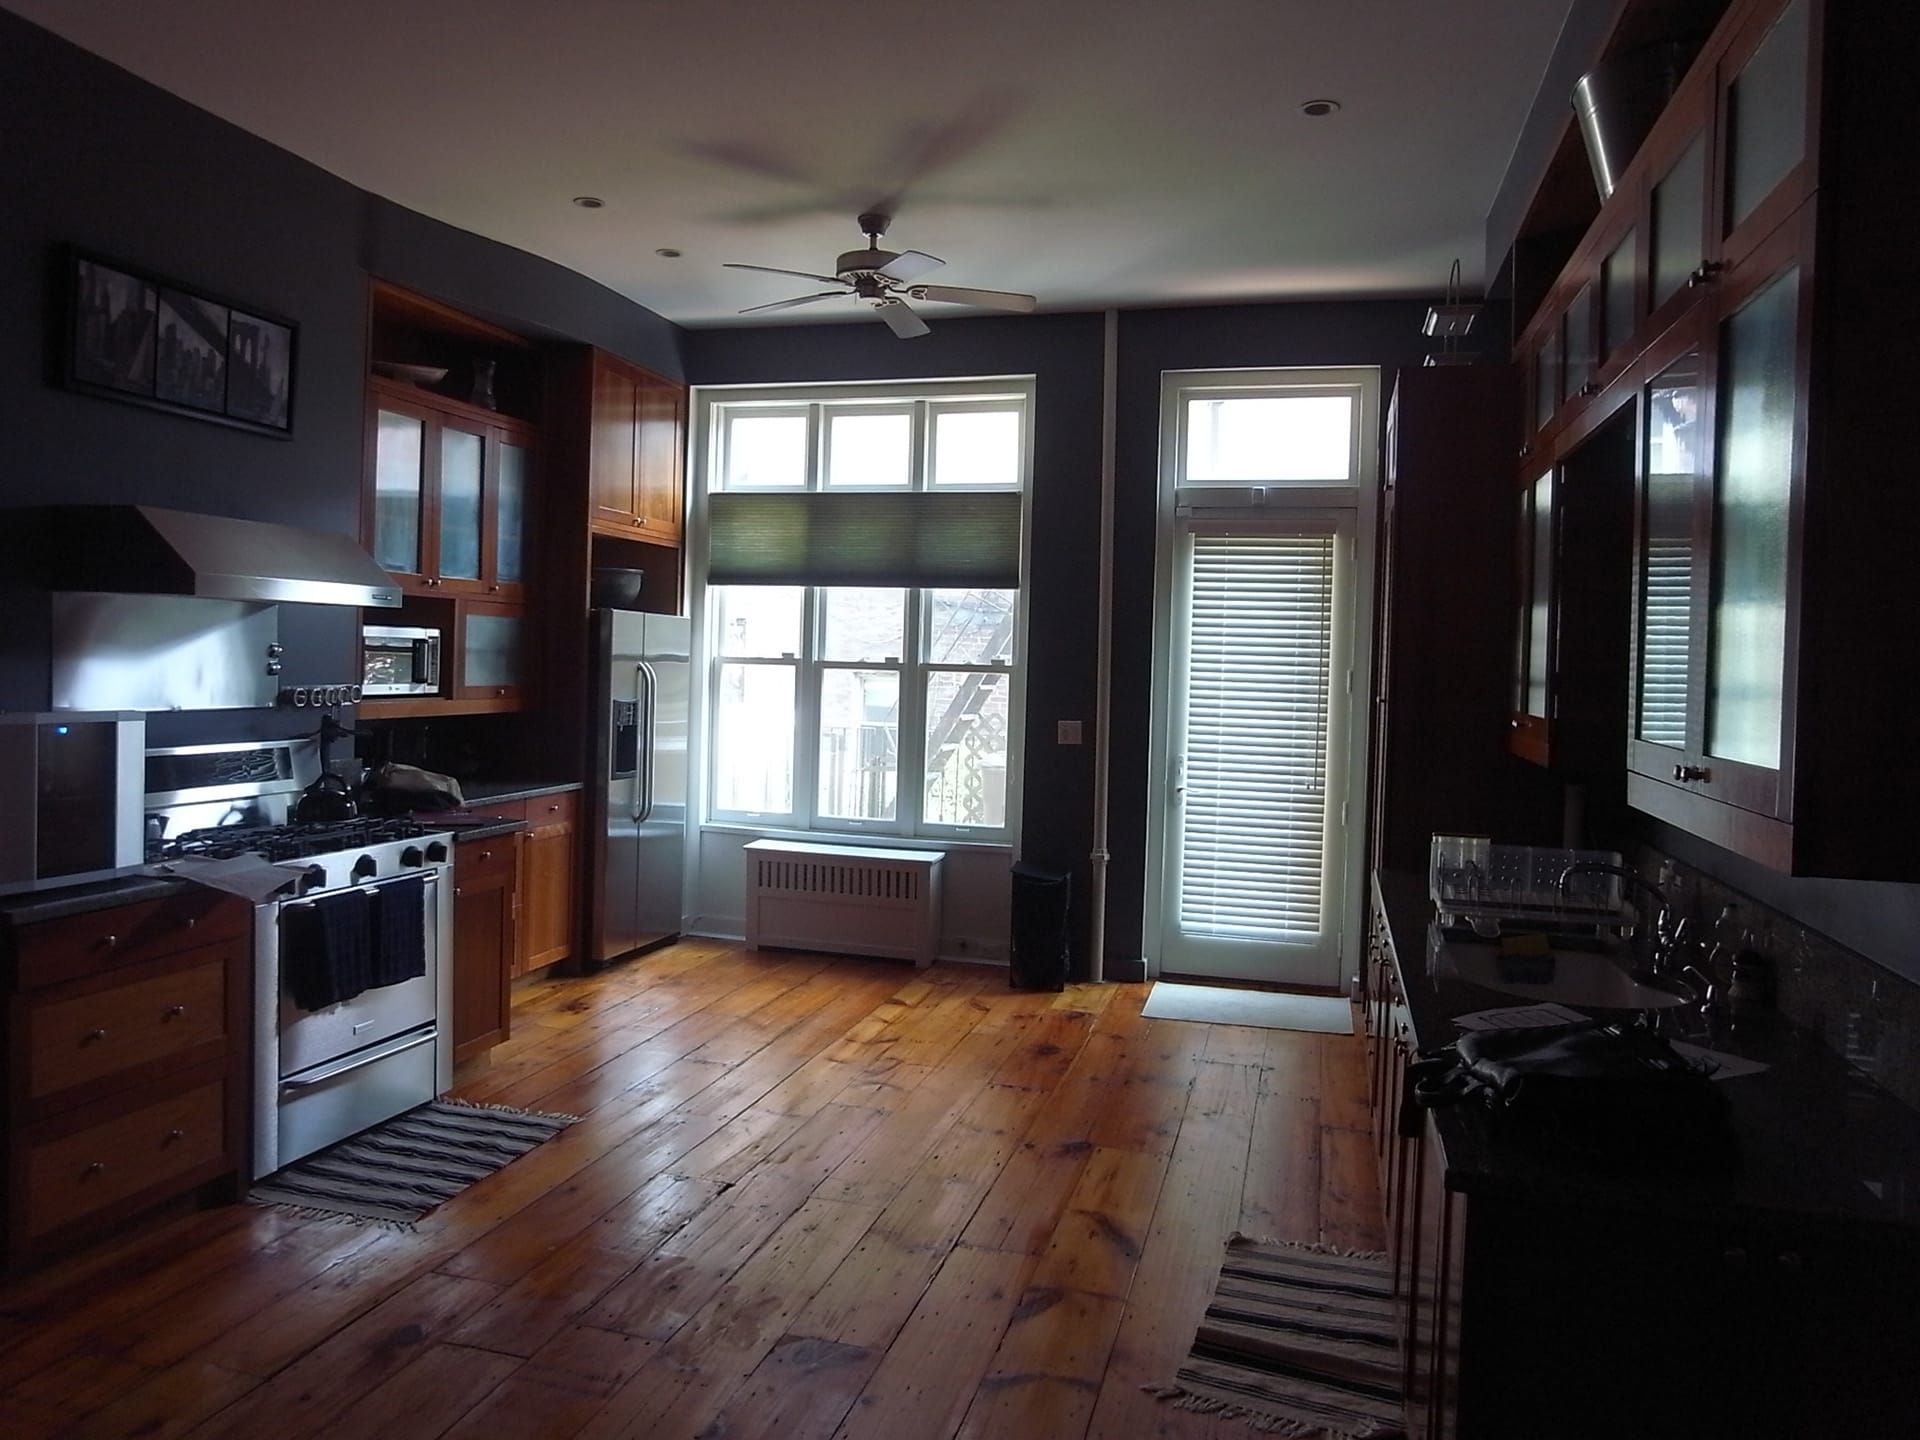 Parlor level kitchen with dark wide plank floors and dark wood cabinetry and a ceiling fan.